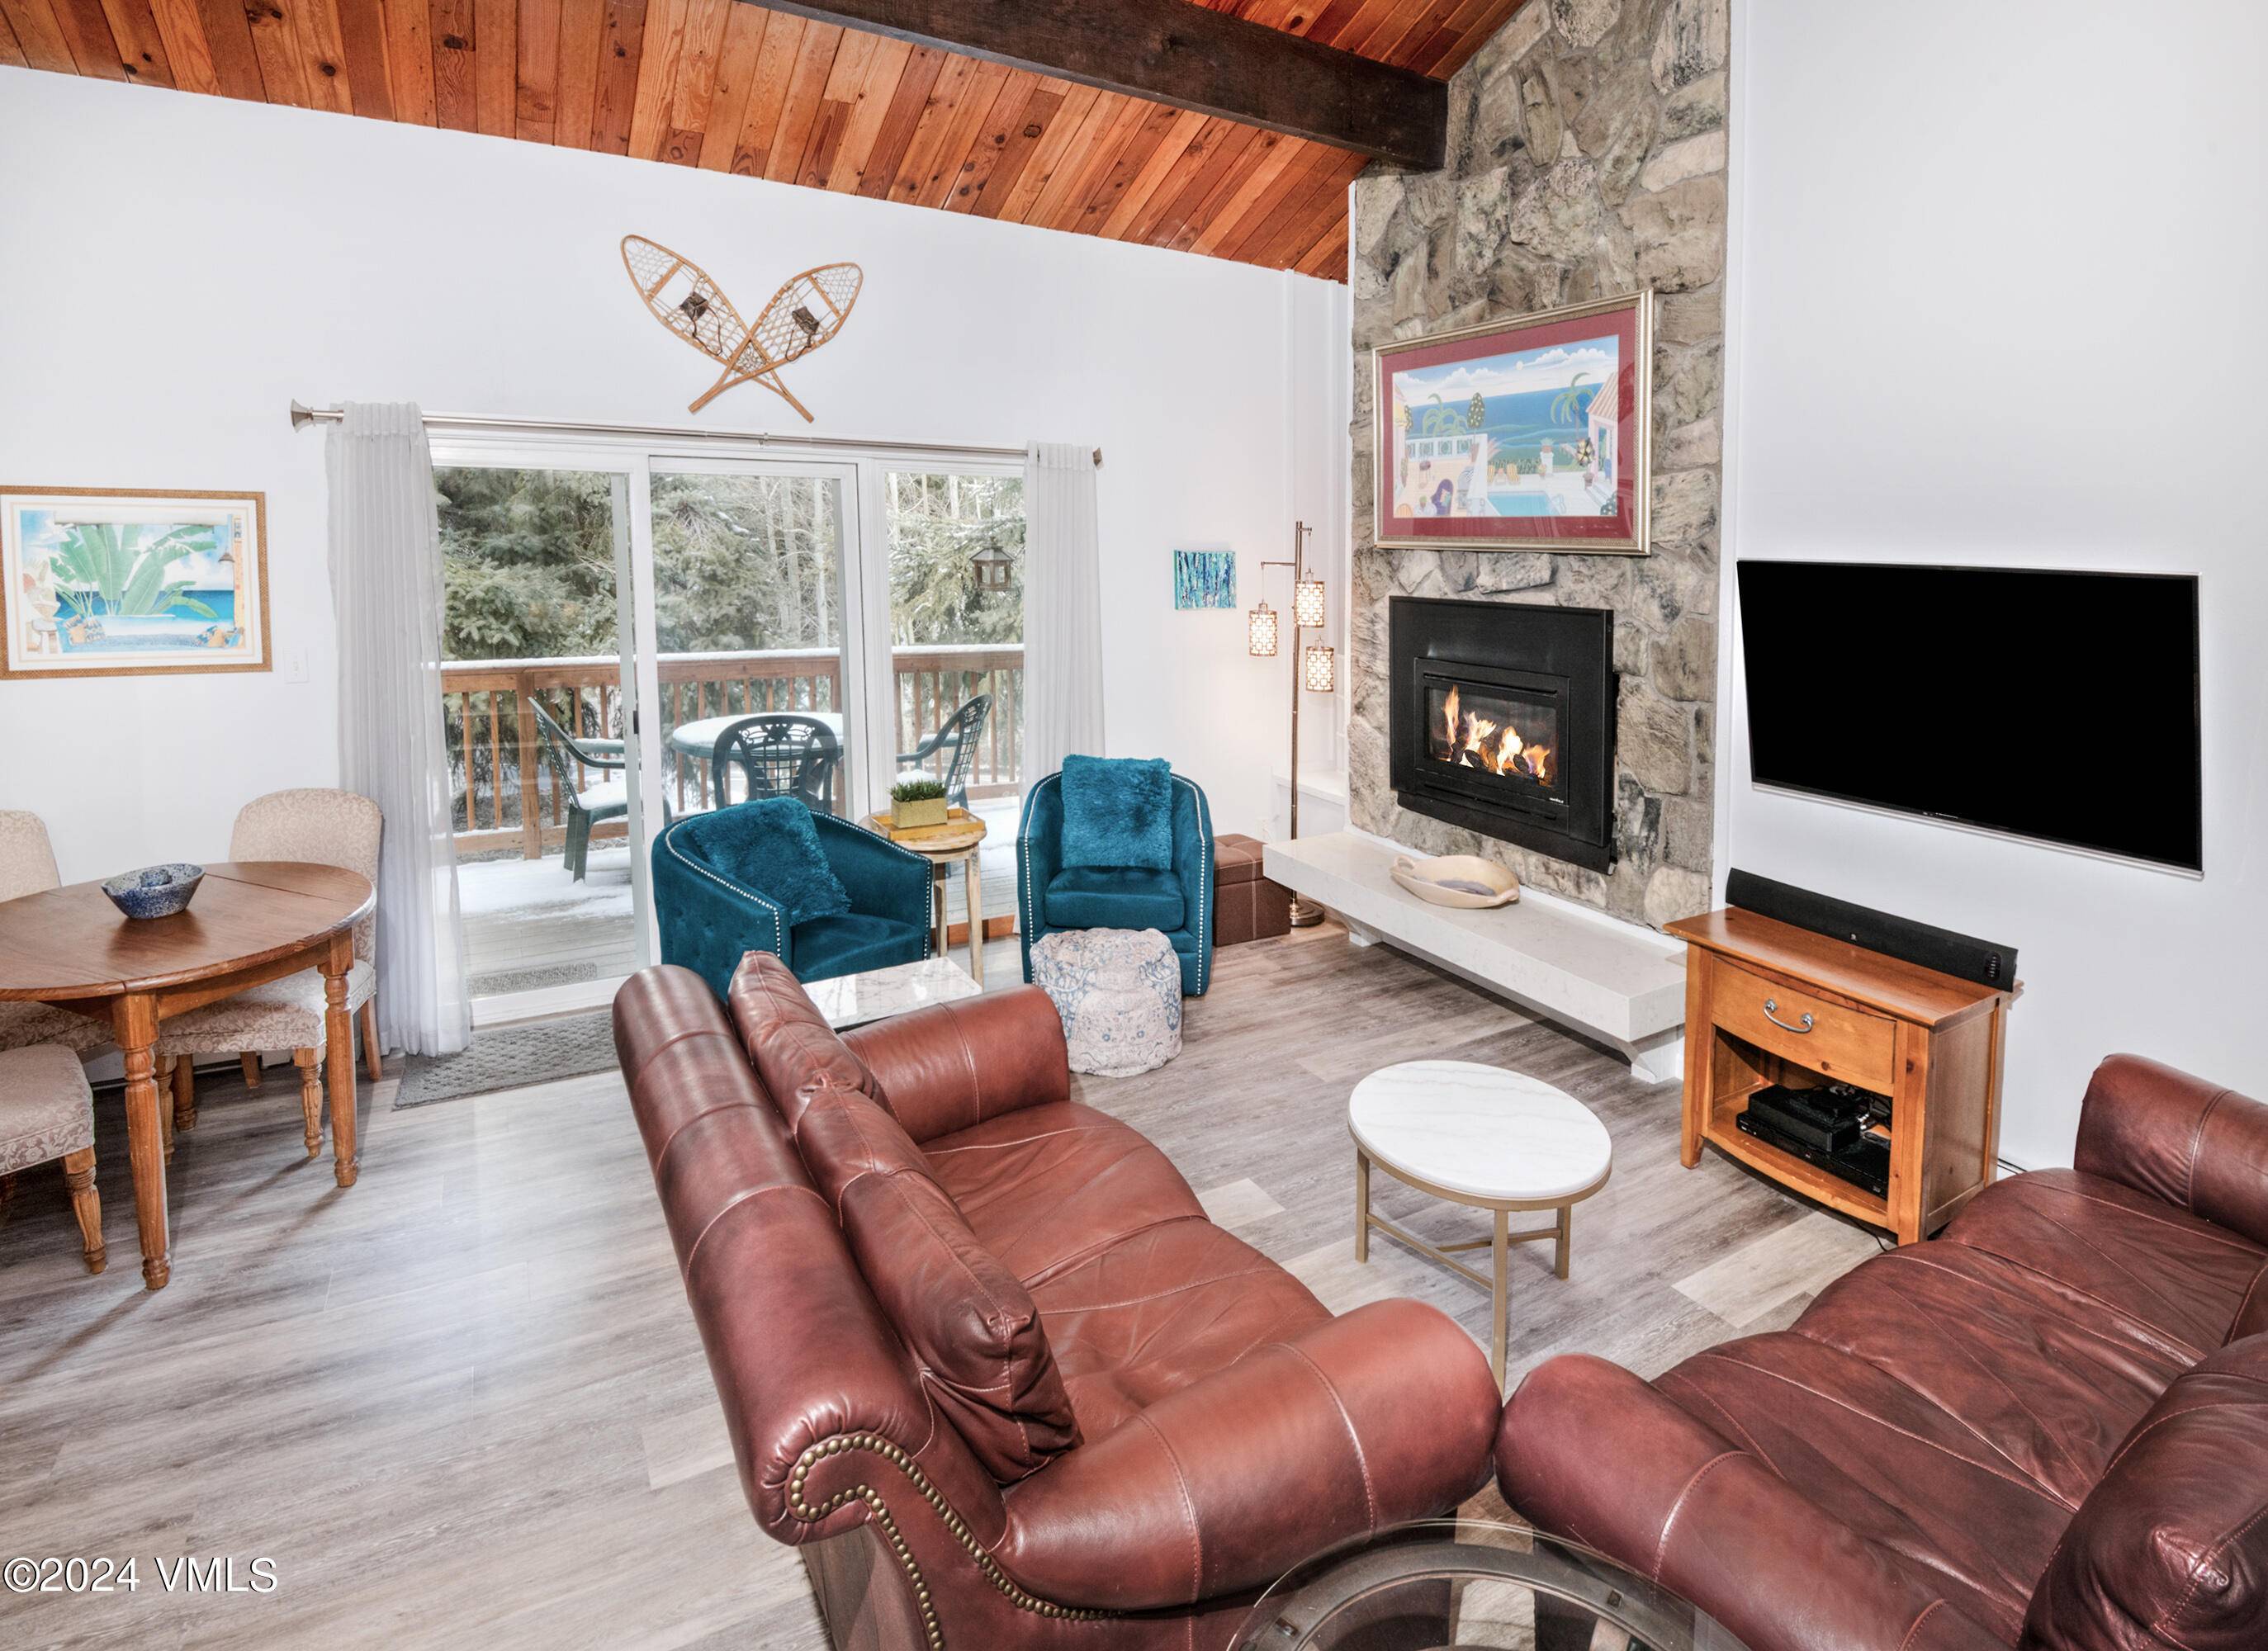 Located in the highly desirable area of Matterhorn in West Vail.